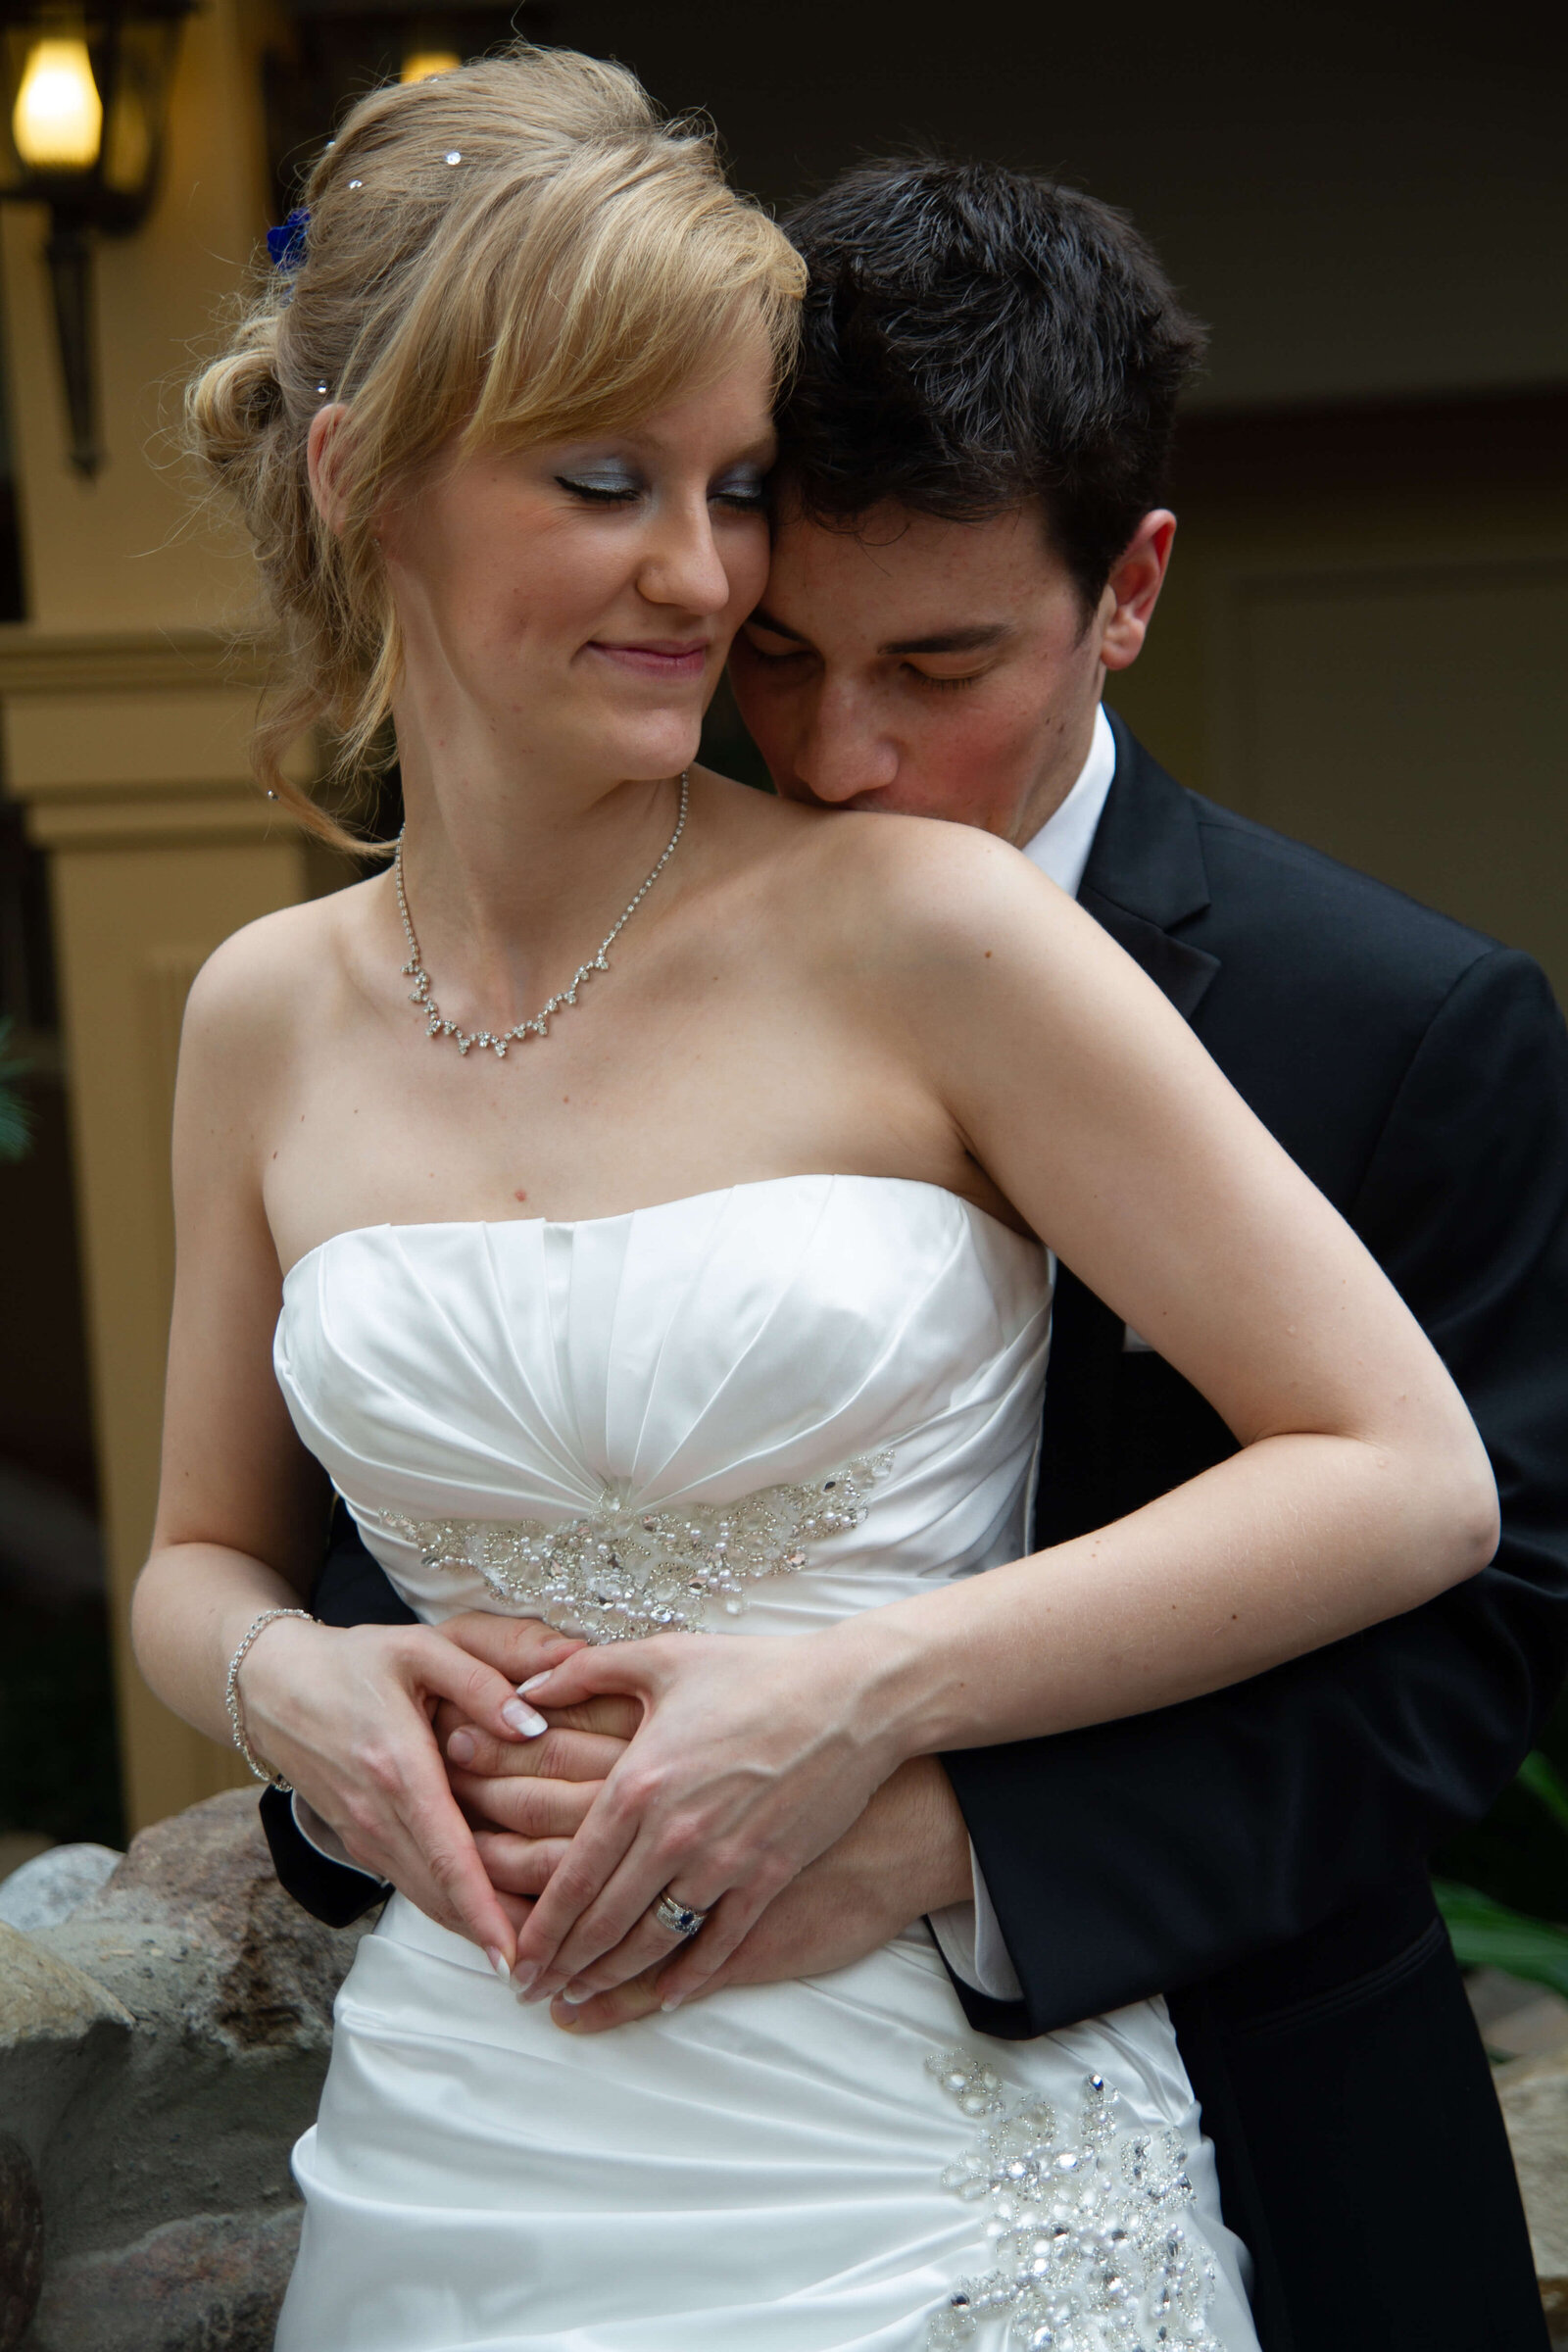 Groom holding bride from behind, kissing her gently on the neck